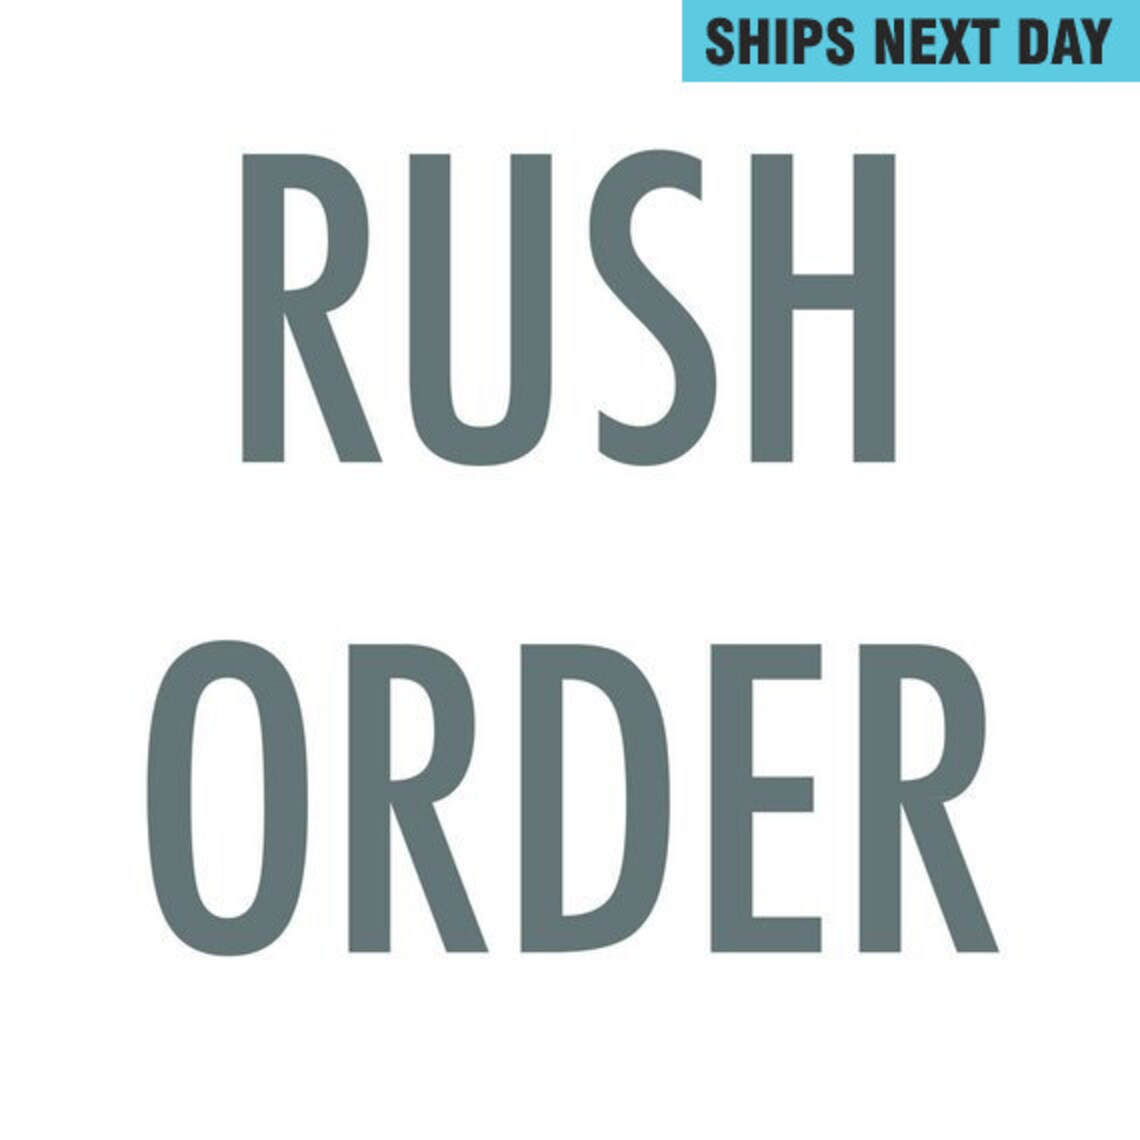  No-Rush Shipping: All Departments